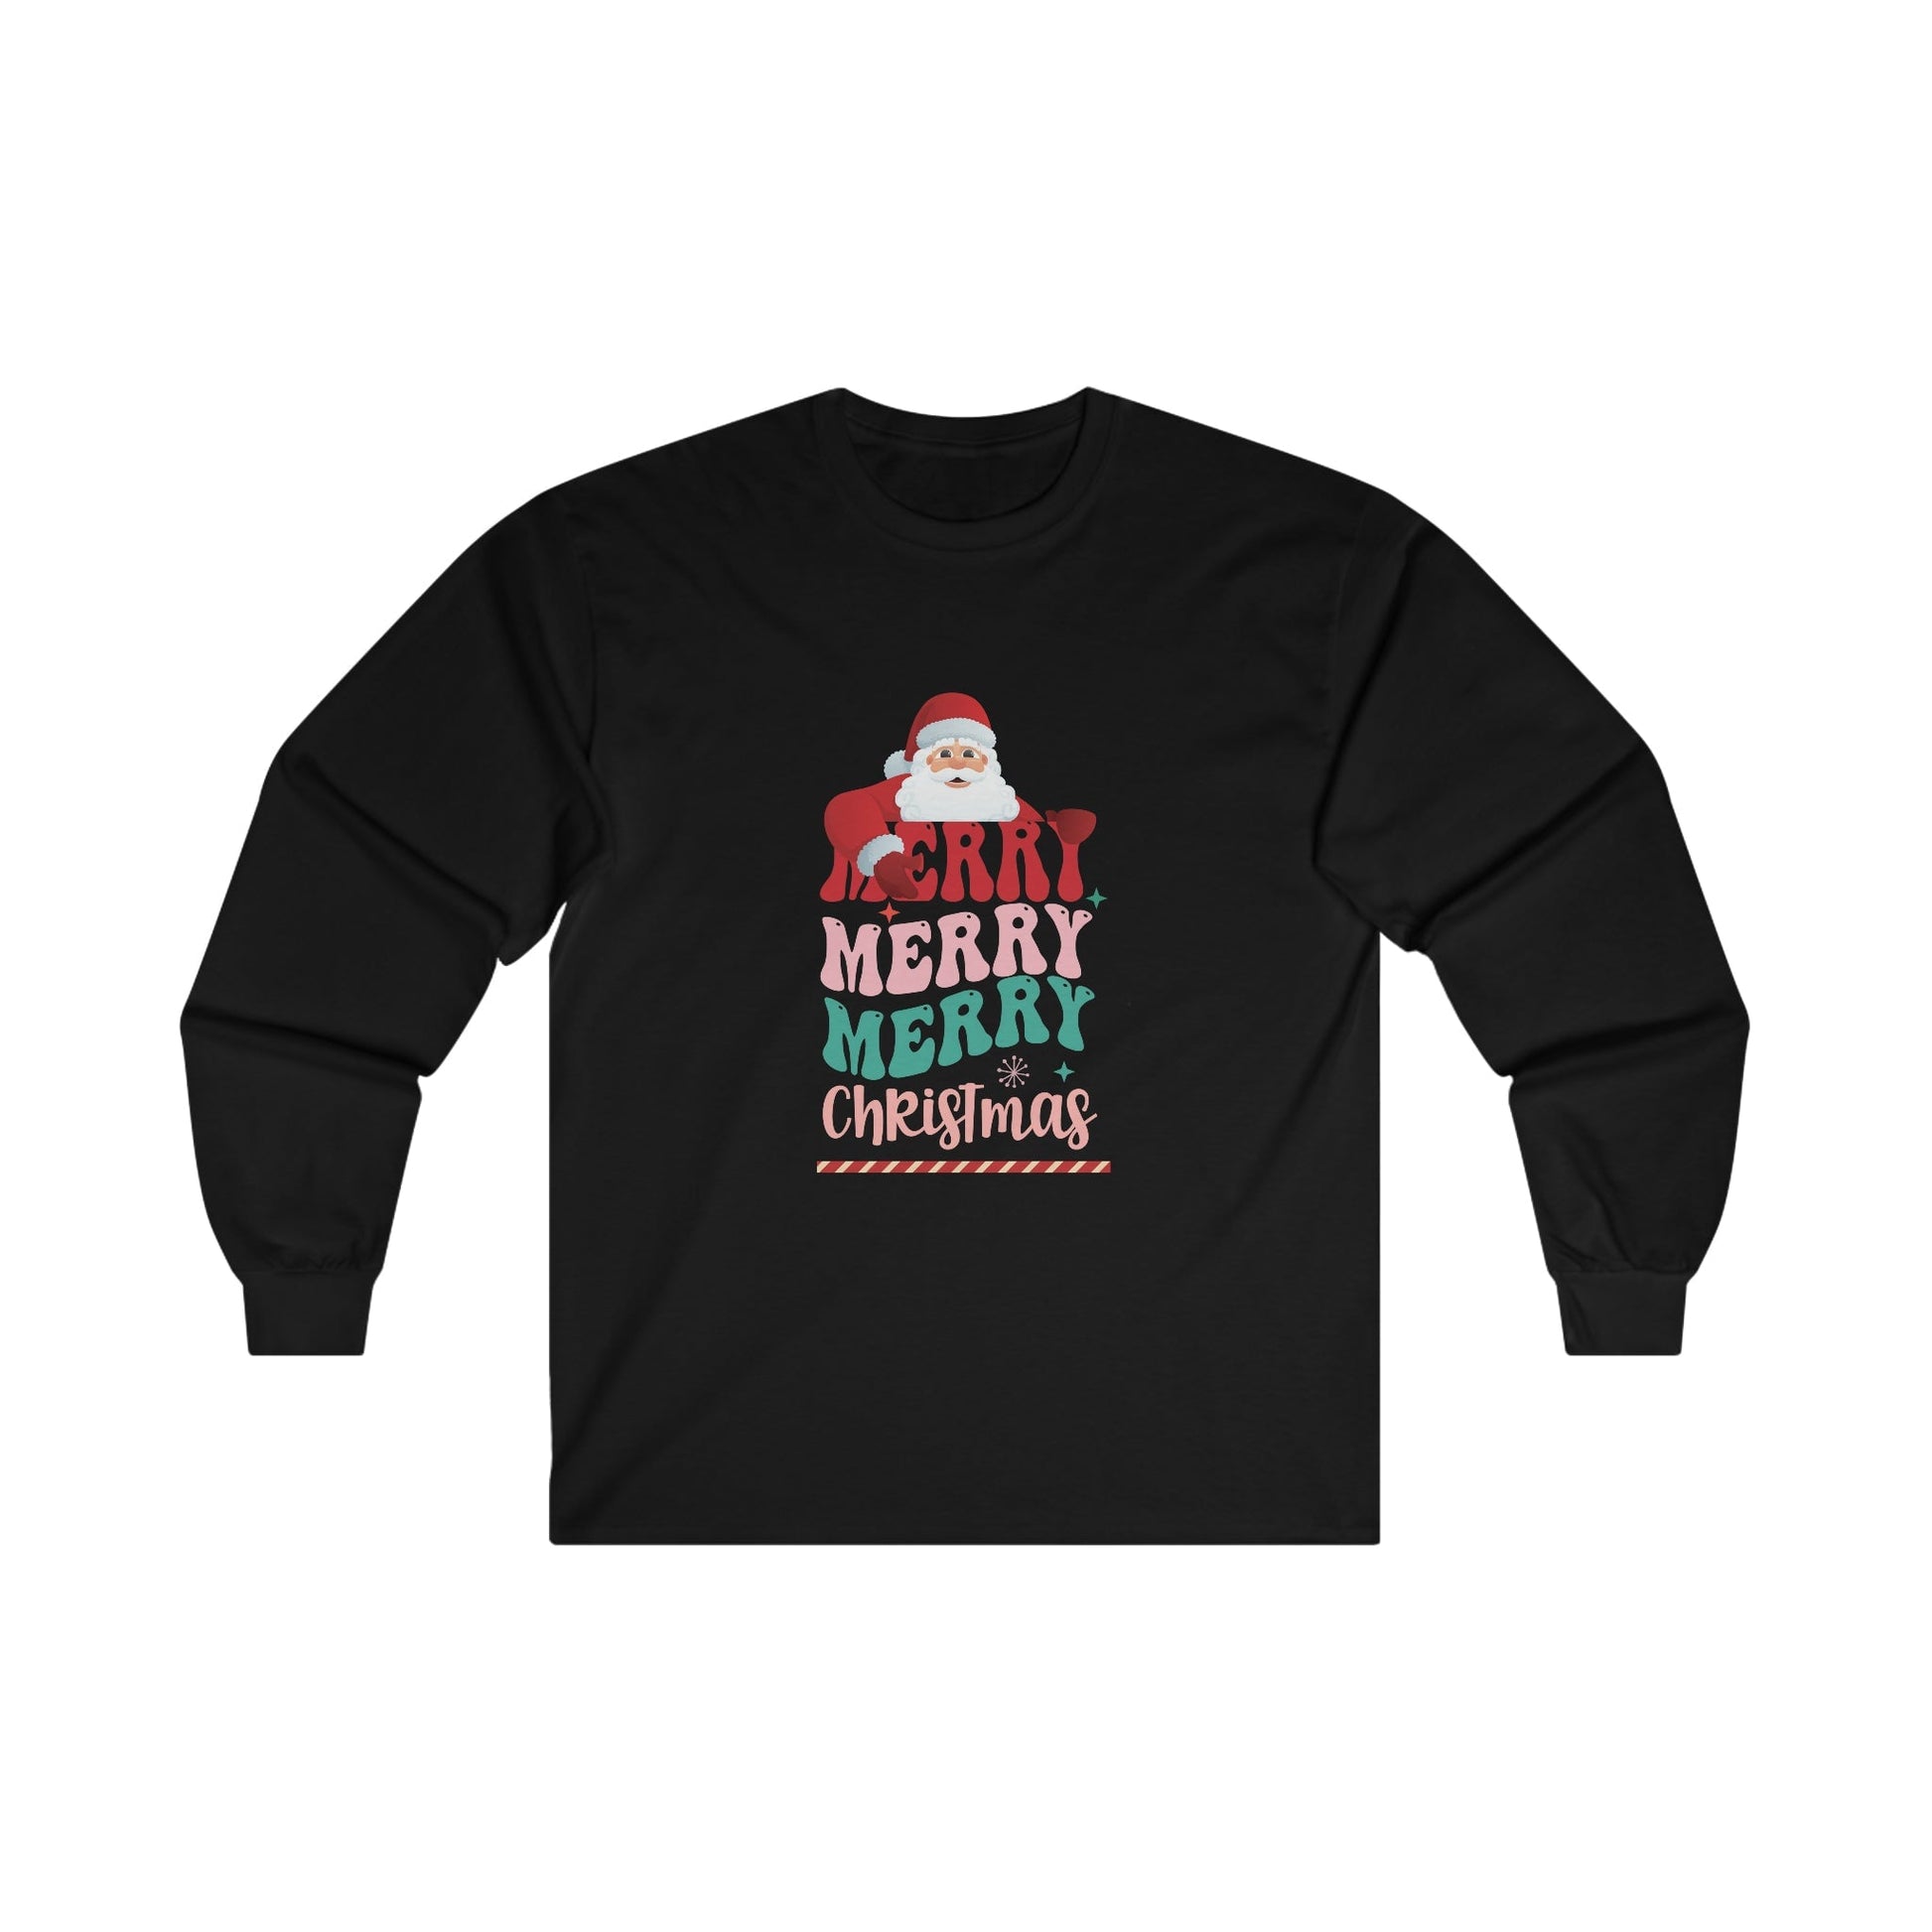 Christmas Long Sleeve T-Shirt - Merry Merry Merry Christmas - Cute Christmas Shirts - Youth and Adult Christmas Long Sleeve TShirts Long Sleeve T-Shirts Graphic Avenue Black Adult Small 